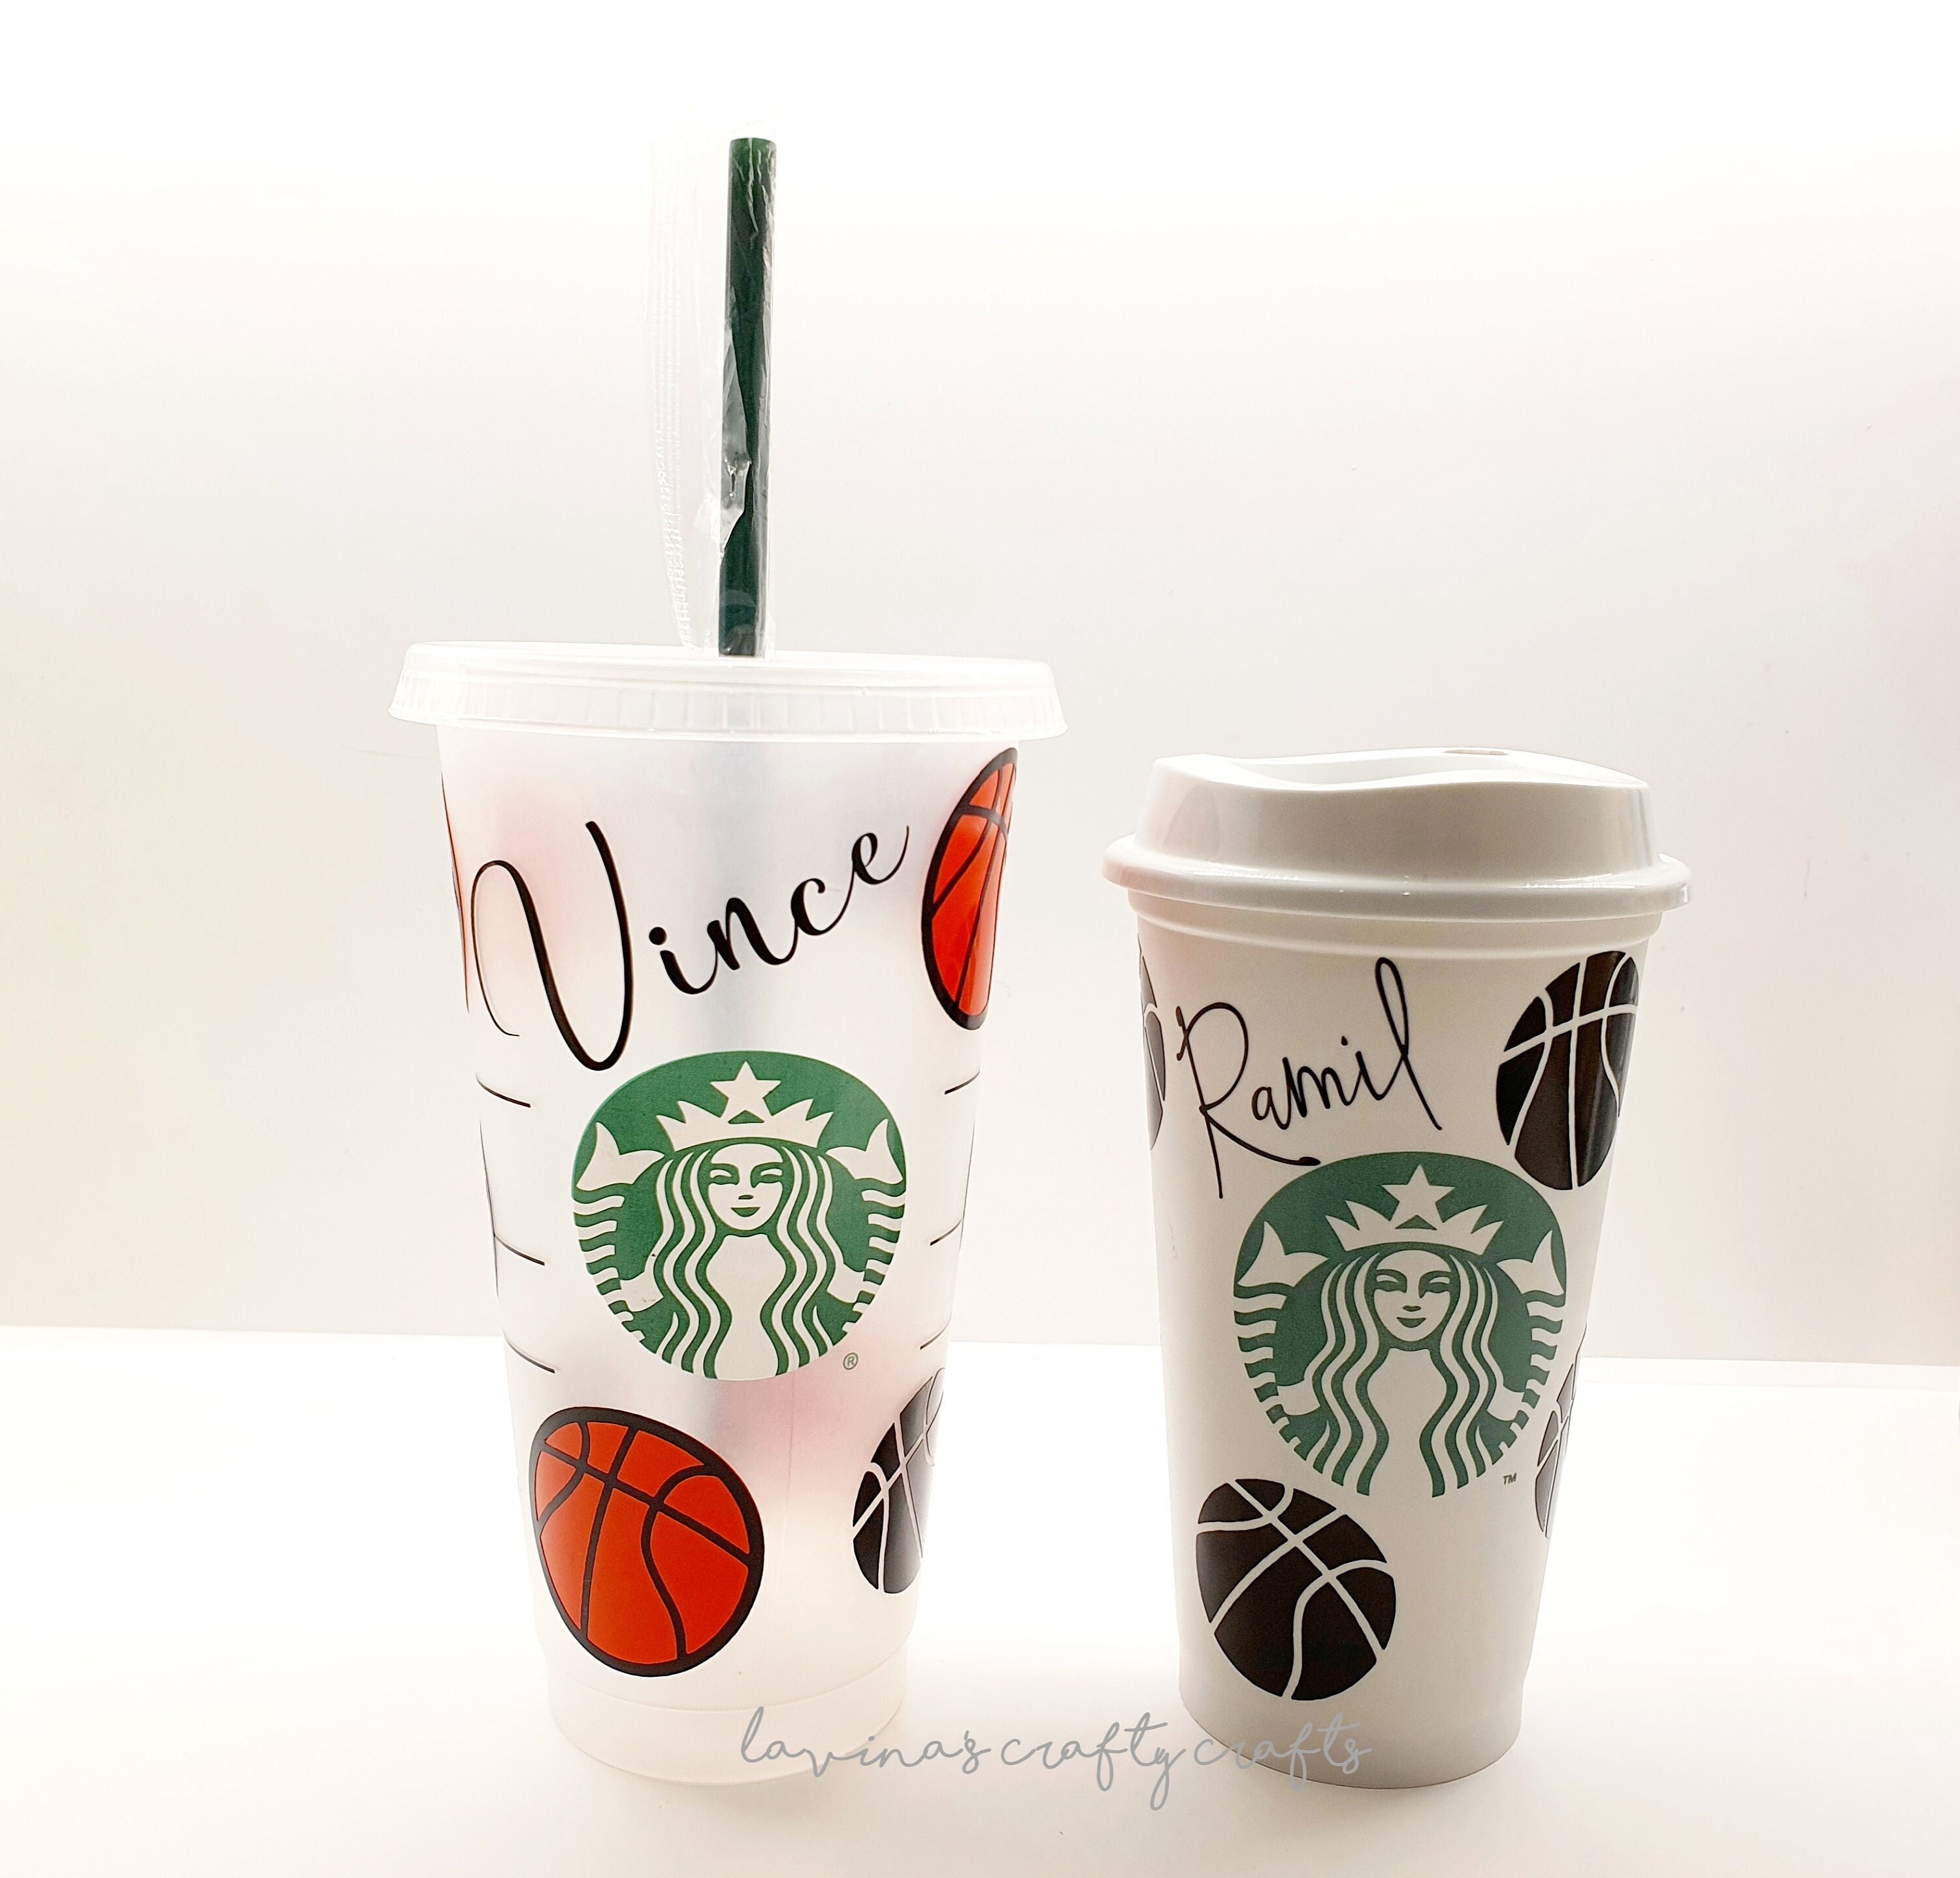 Dottie Digitals - Basket Ball Mom Starbucks SVG Cold Cup - svgs PNG DXF  Cutting File 24oz Basketball Venti - Sport Hoops Coffee Vinyl Wrap Mom Life